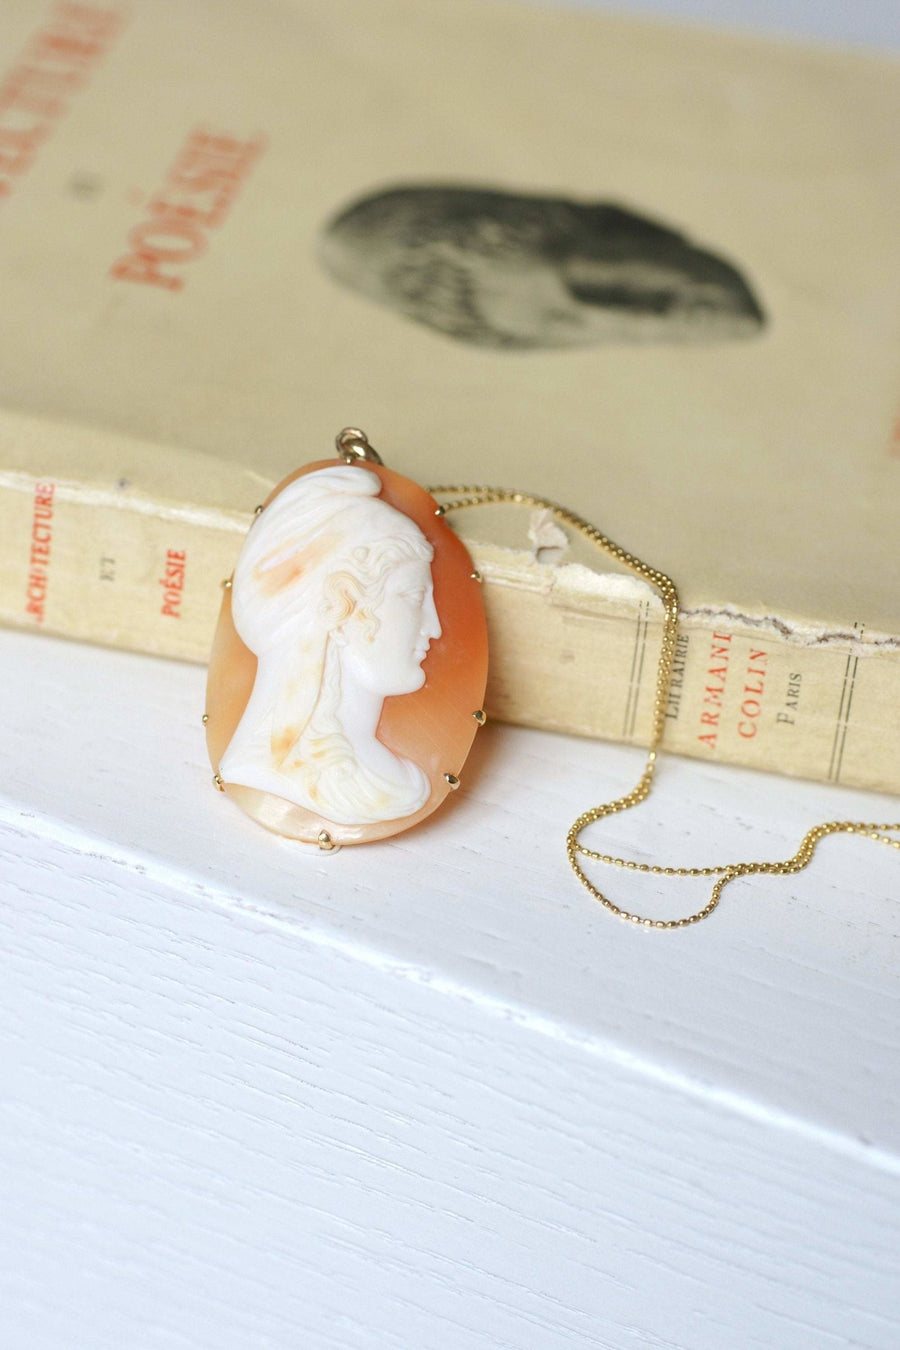 Marianne cameo shell pendant - Penelope Gallery